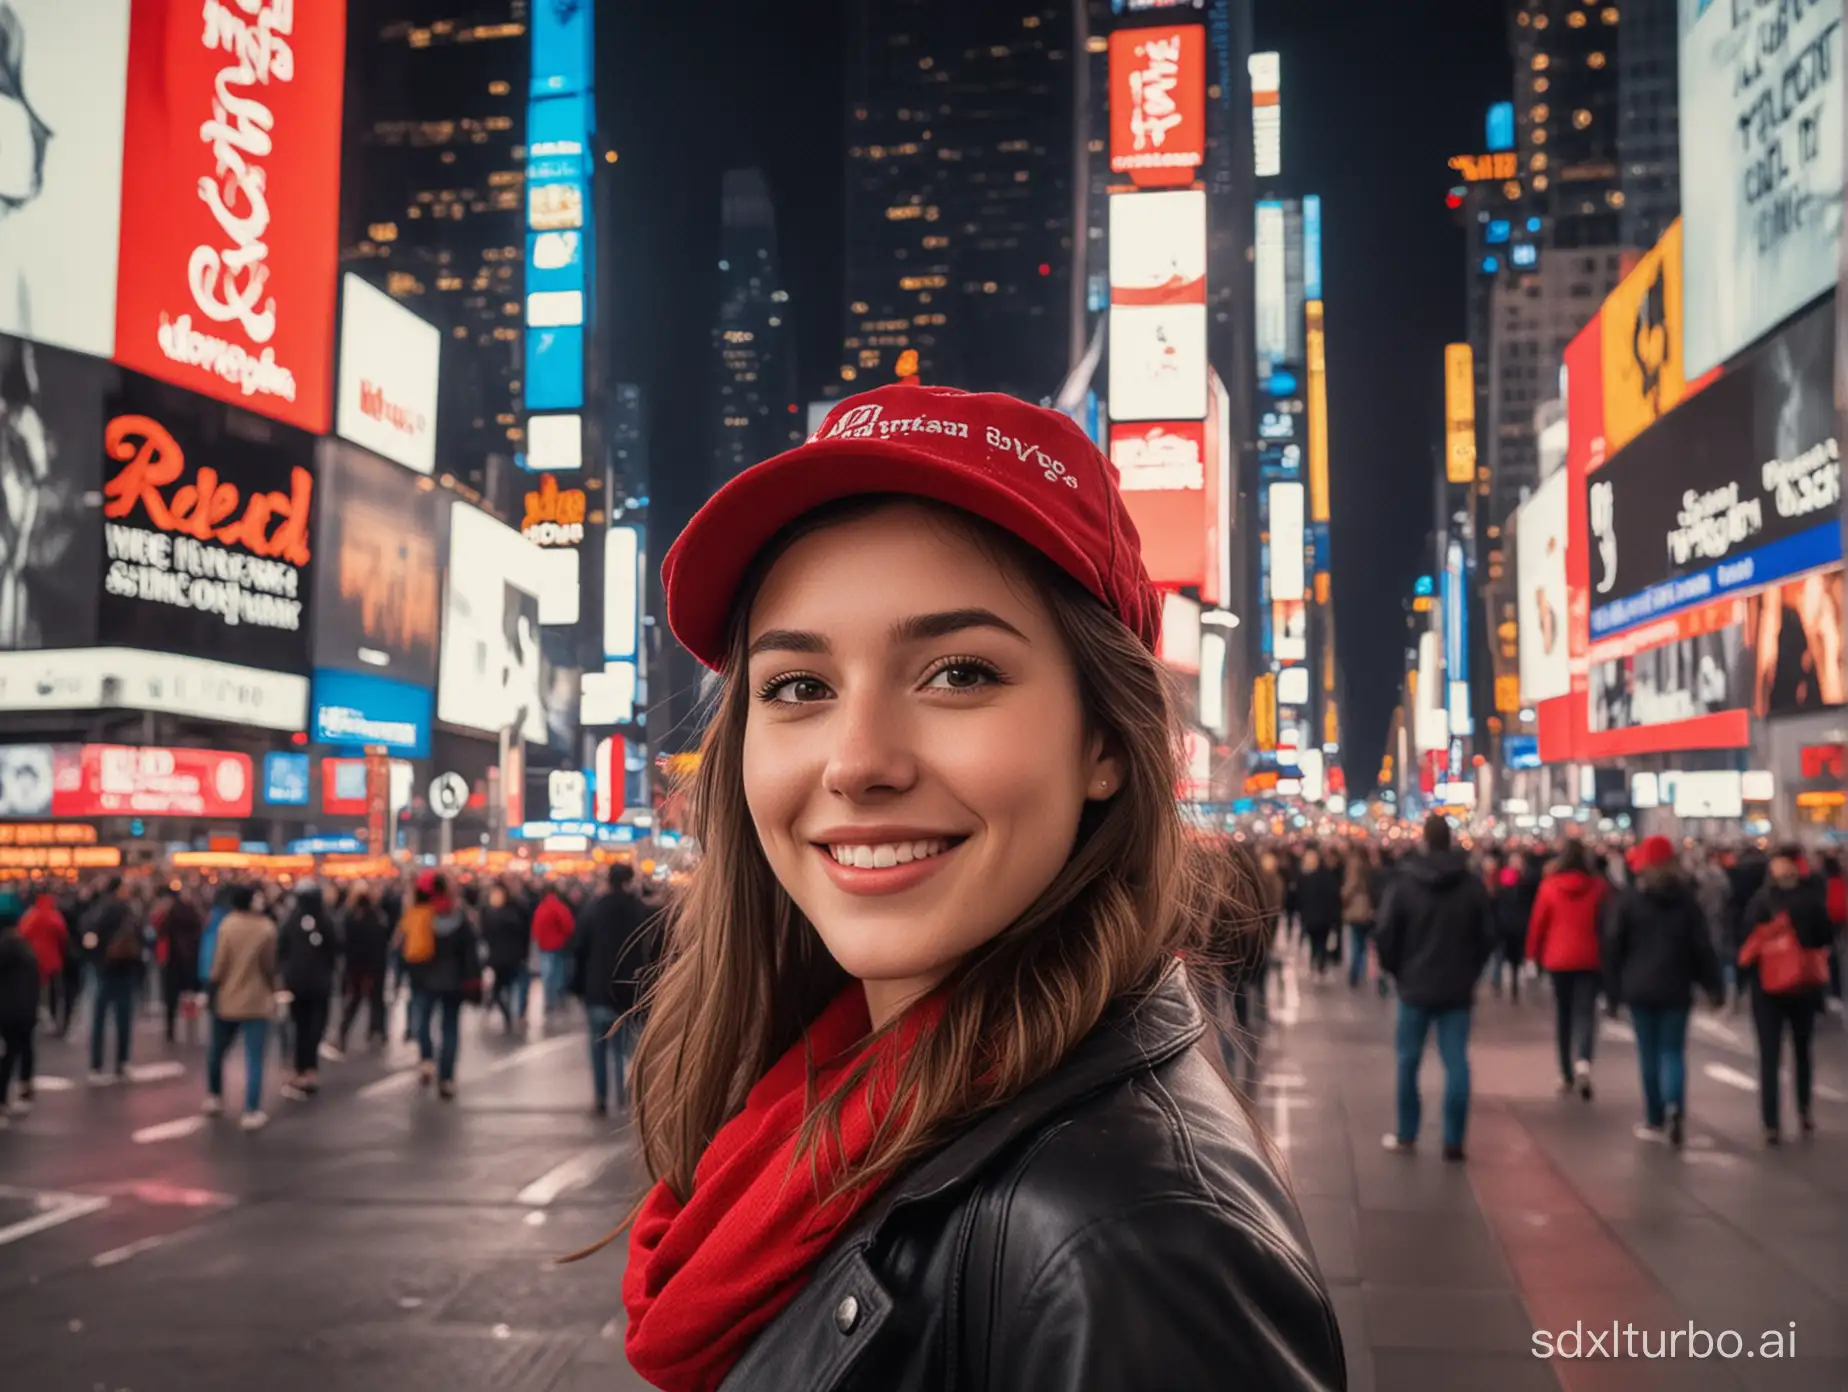 A beautiful girl in the middle of New York time square with a smile on her face coz she is wearing a red hat